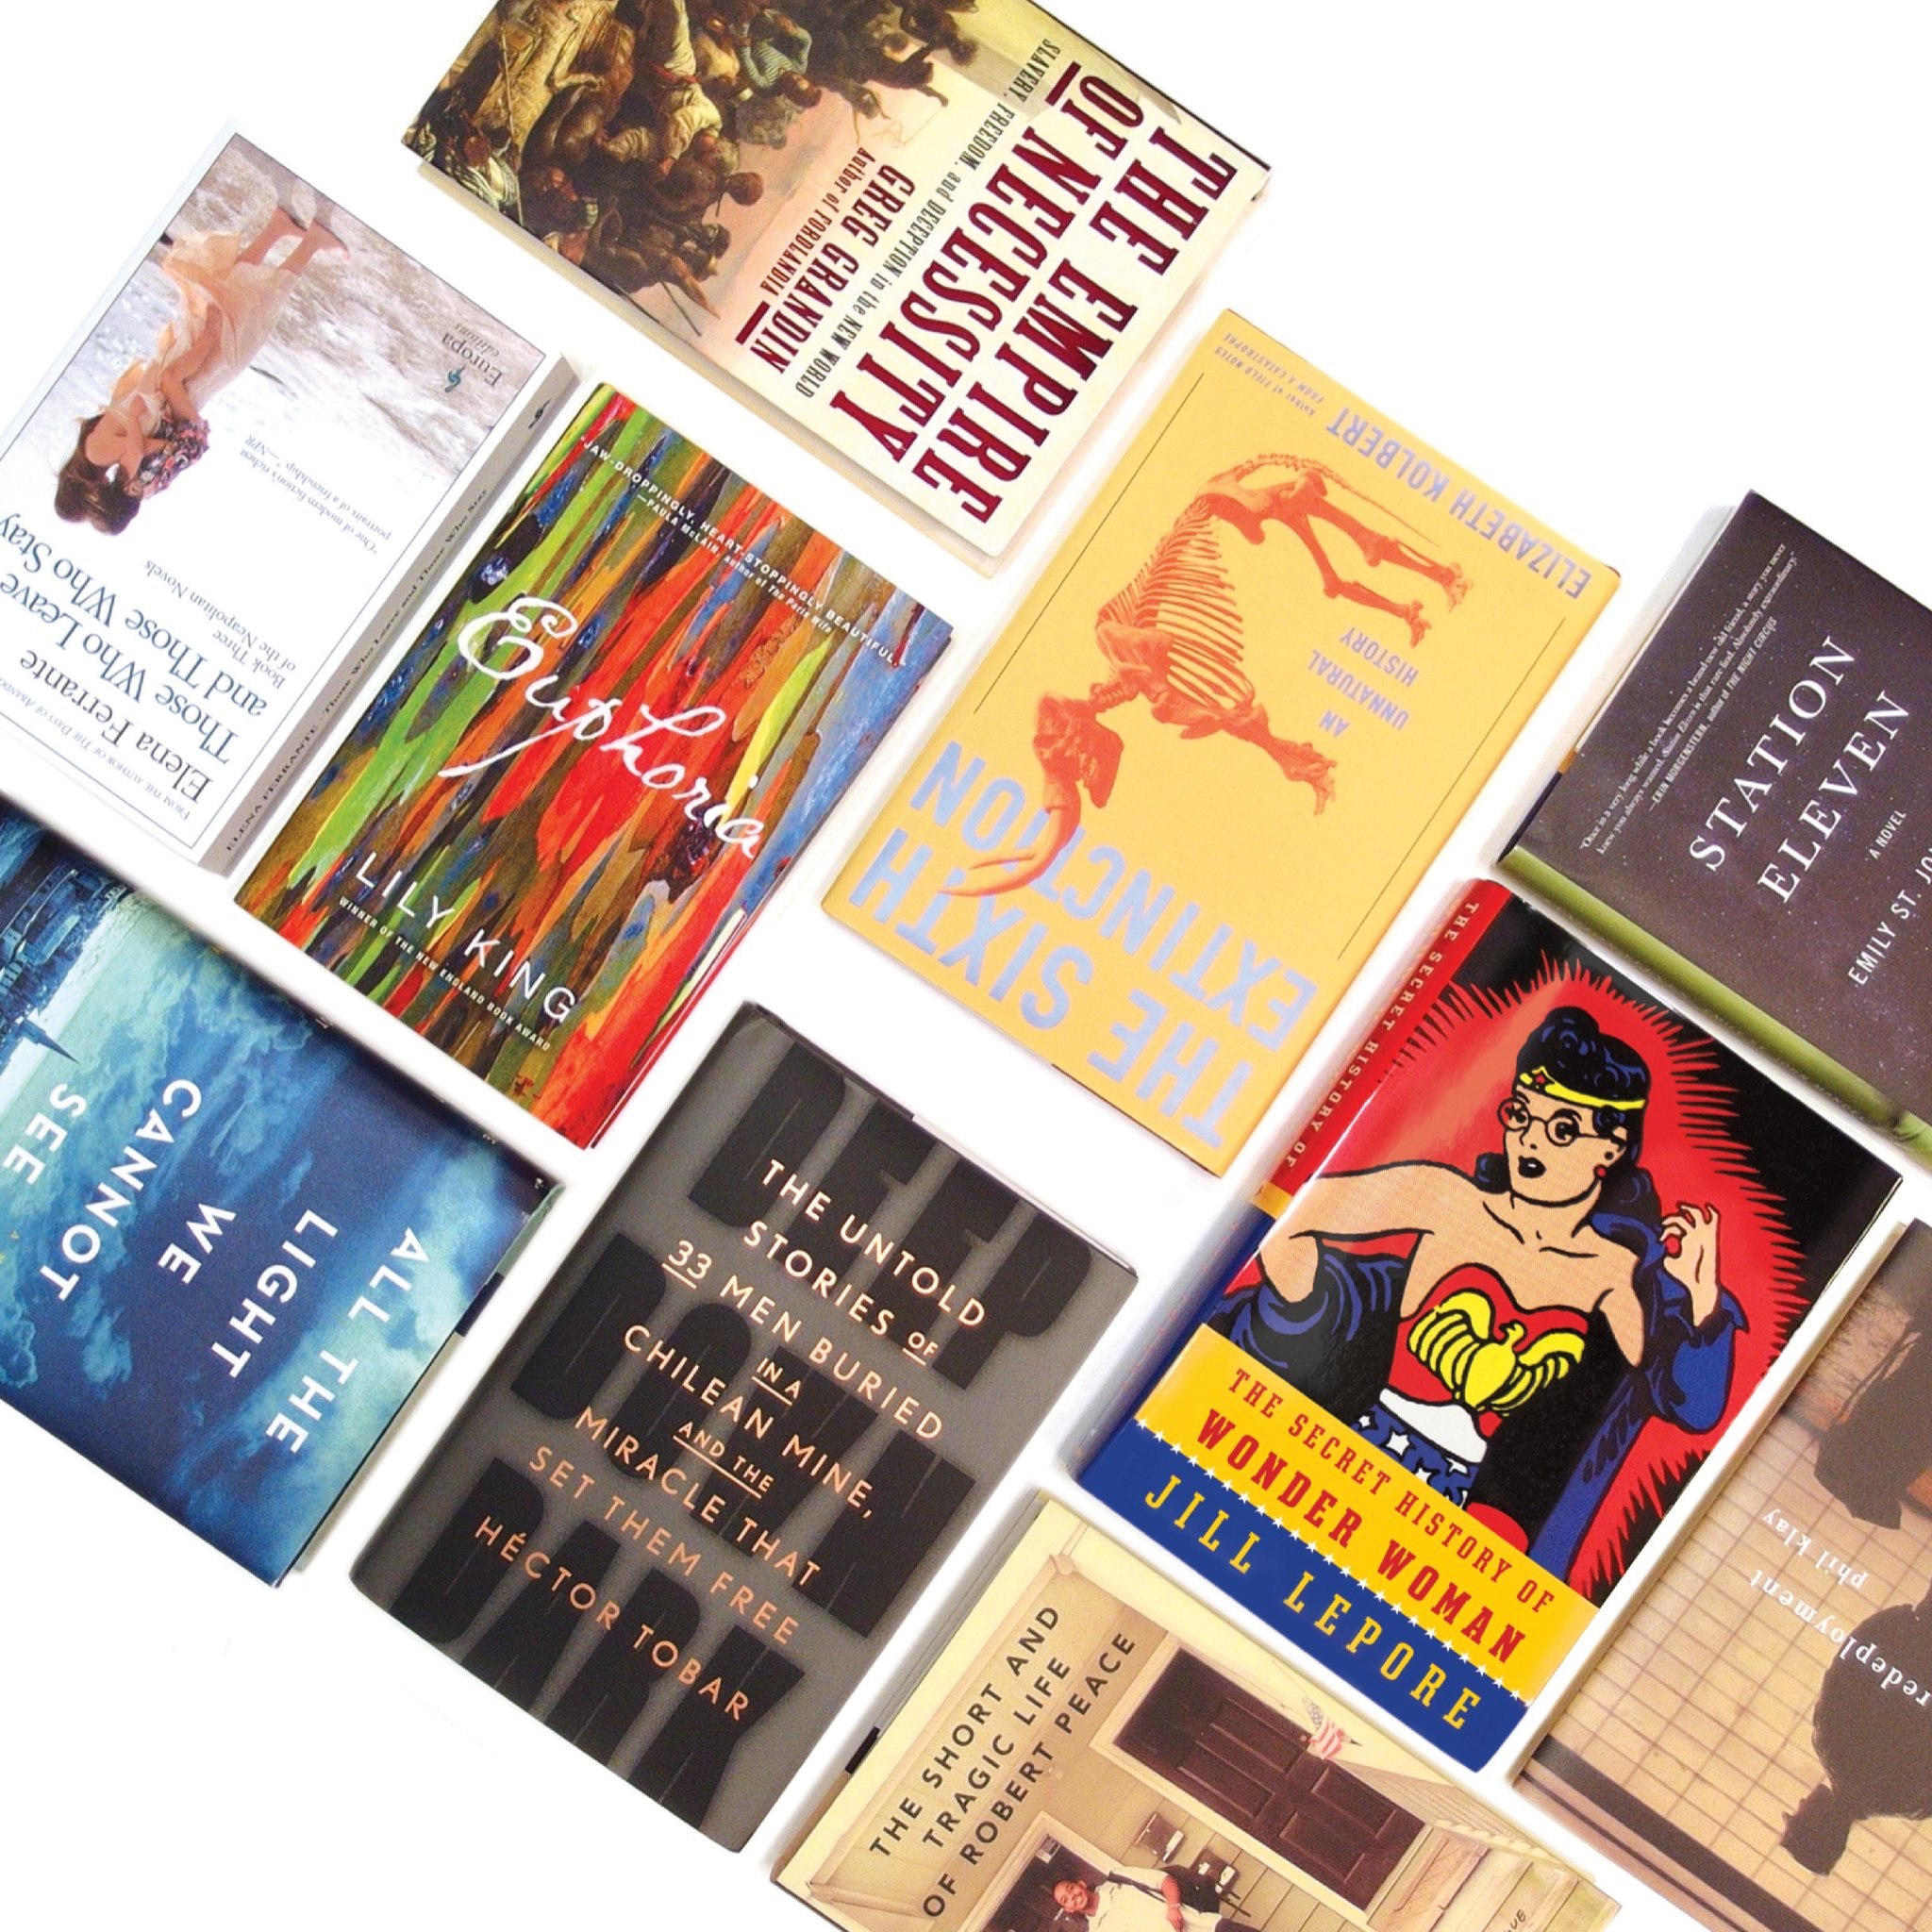 Top 10 Books Of 2014 